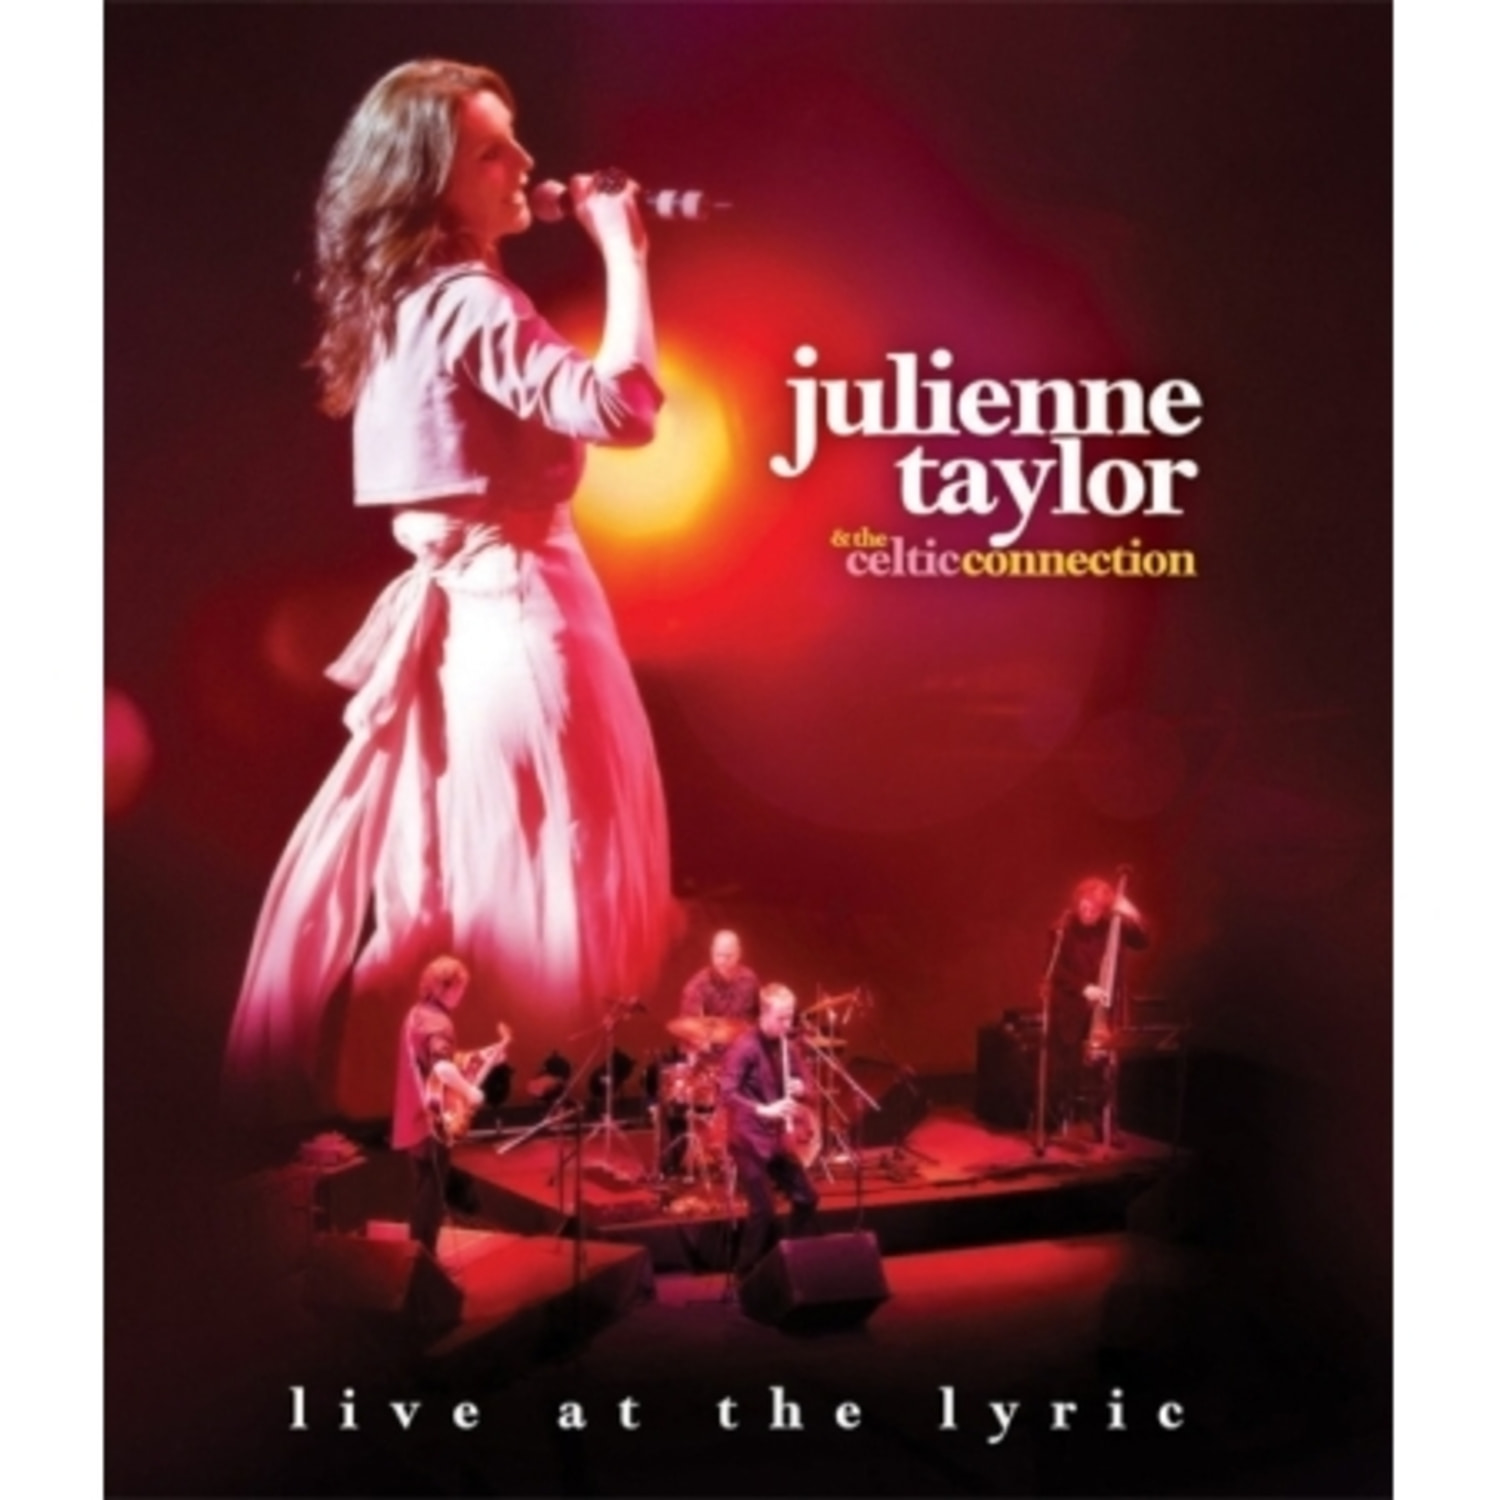 JULIENNE TAYLOR &amp; THE CELTIC CONNECTION - LIVE AT THE LYRIC (1 DISC)